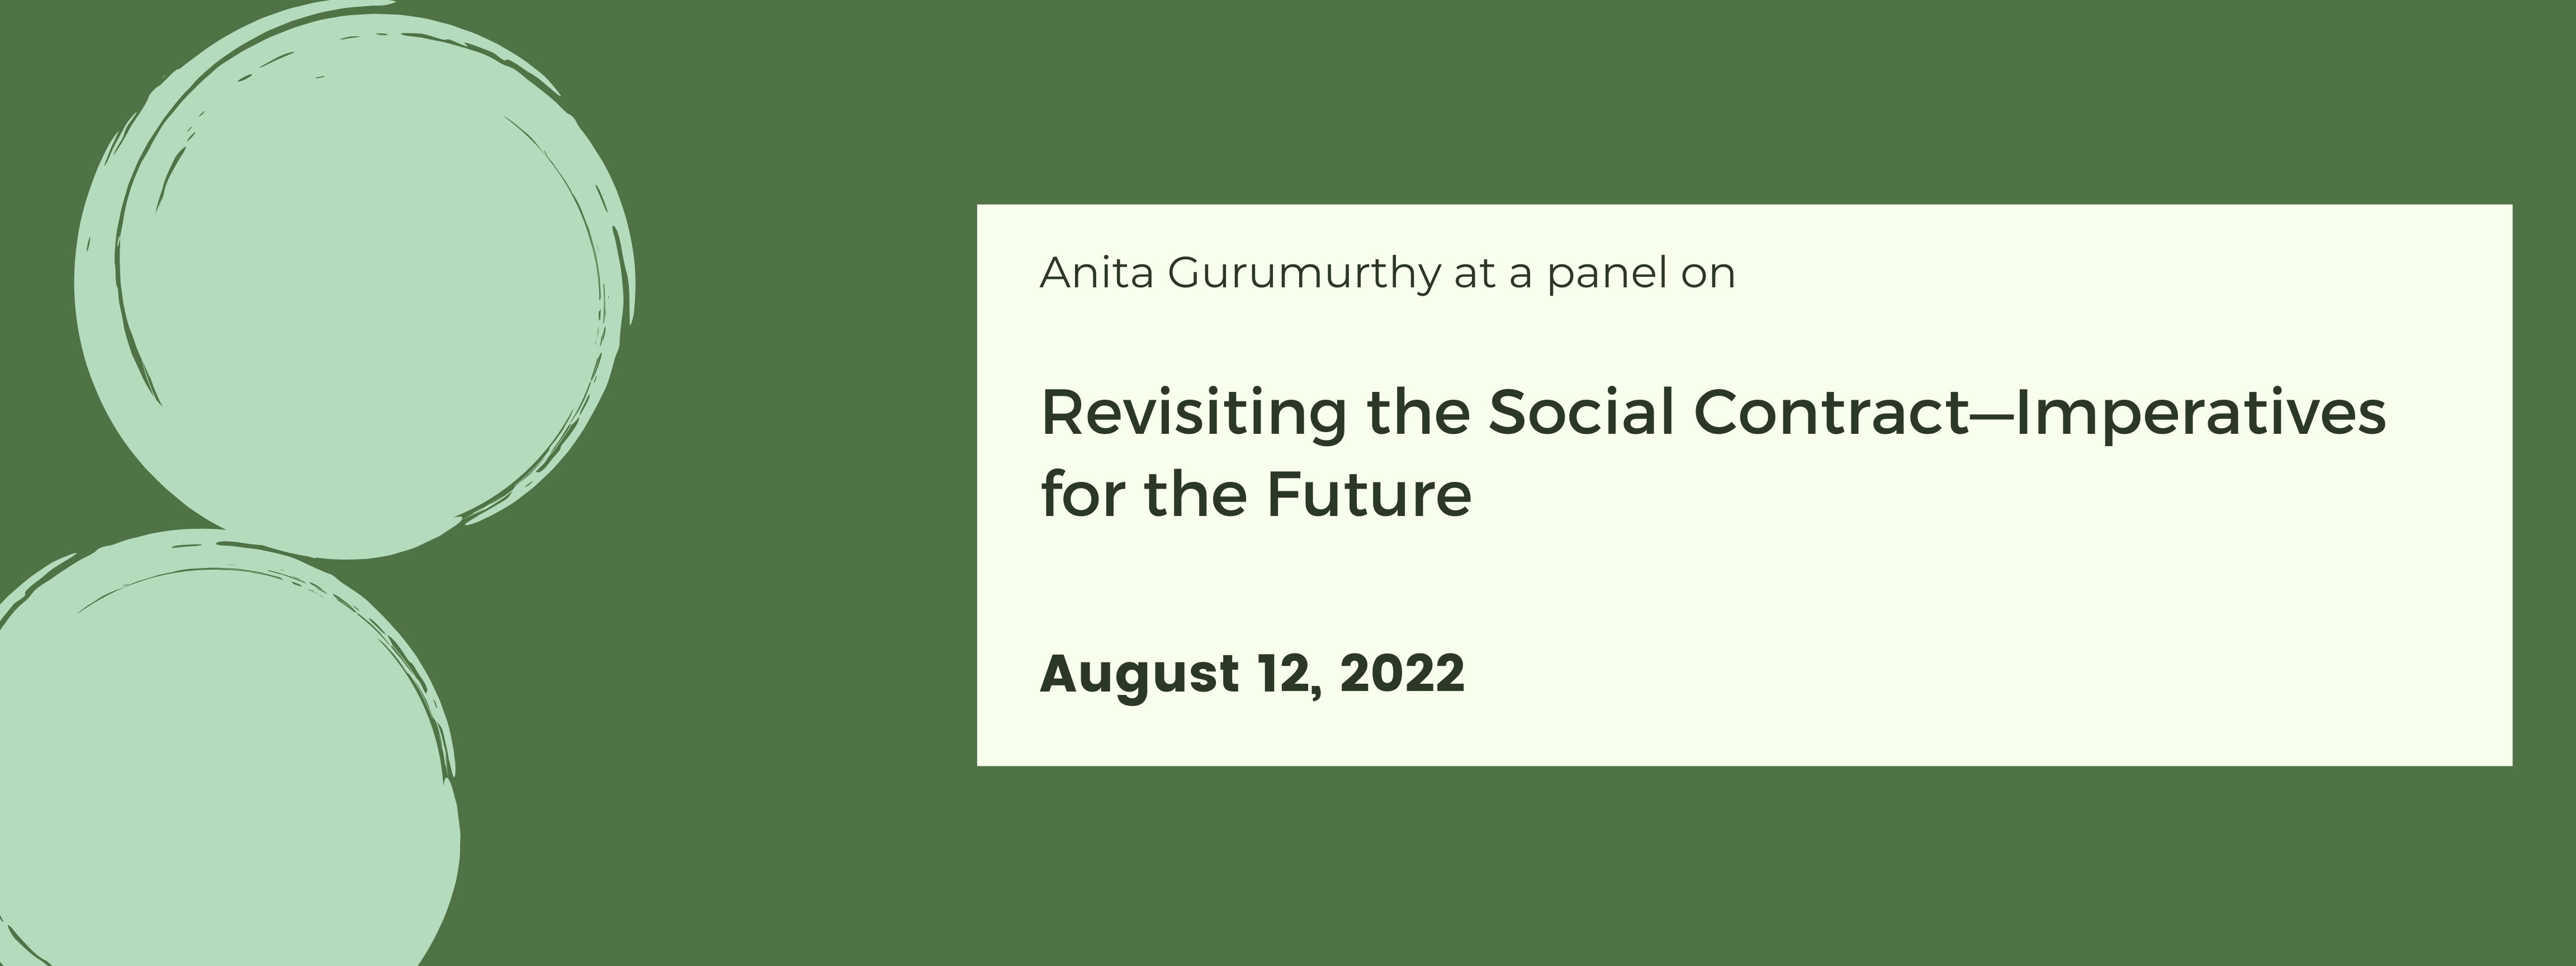 Revisiting the Social Contract - Imperatives for the Future